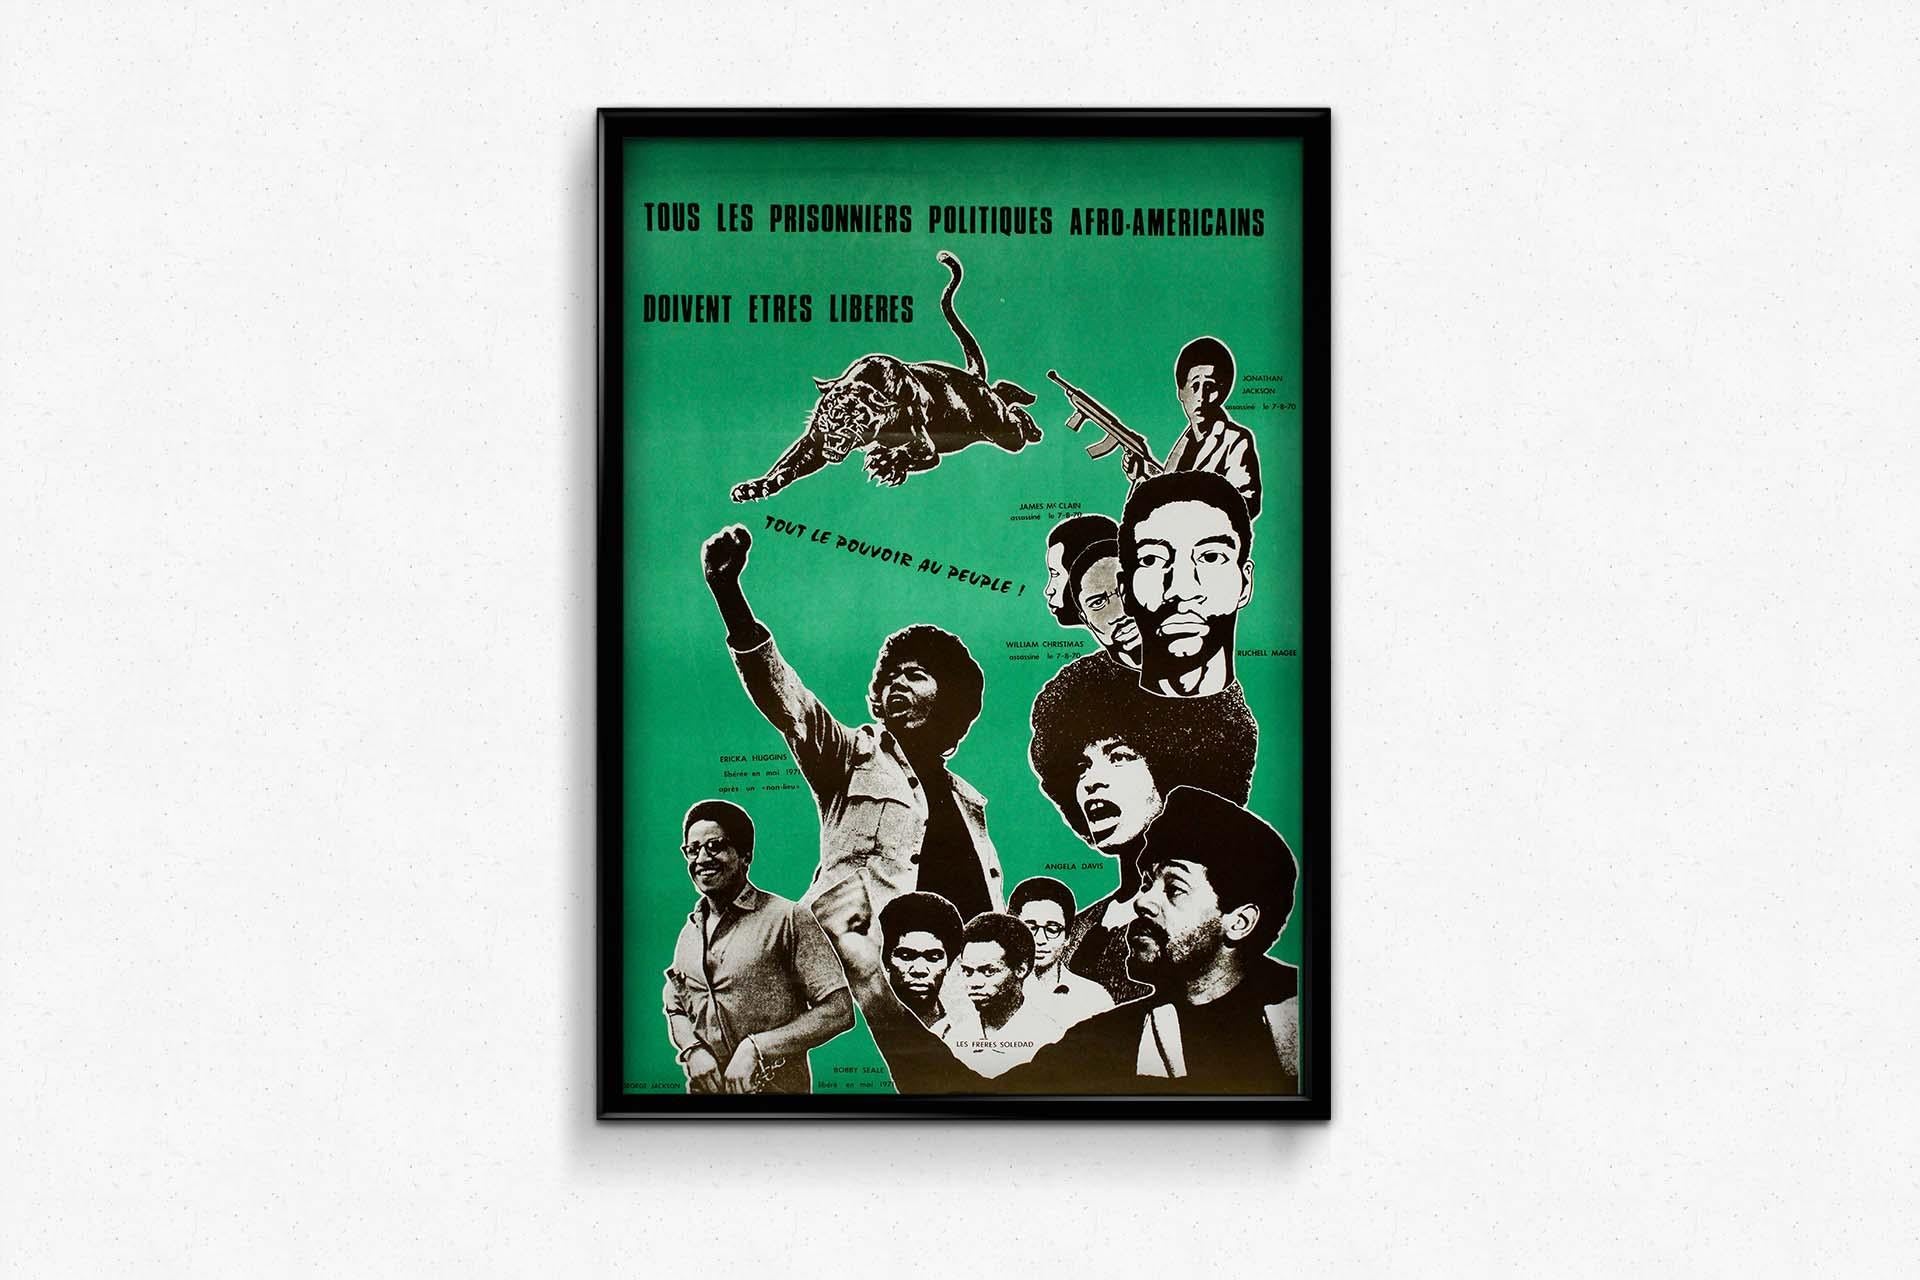 In 1971, a poignant Black Panthers poster emerged as a visual manifesto for justice, featuring the faces of key figures in the fight against systemic oppression. Jonathan Jackson, James Mc Clain, William Christmas, Angela Davis, Rushell Magee,